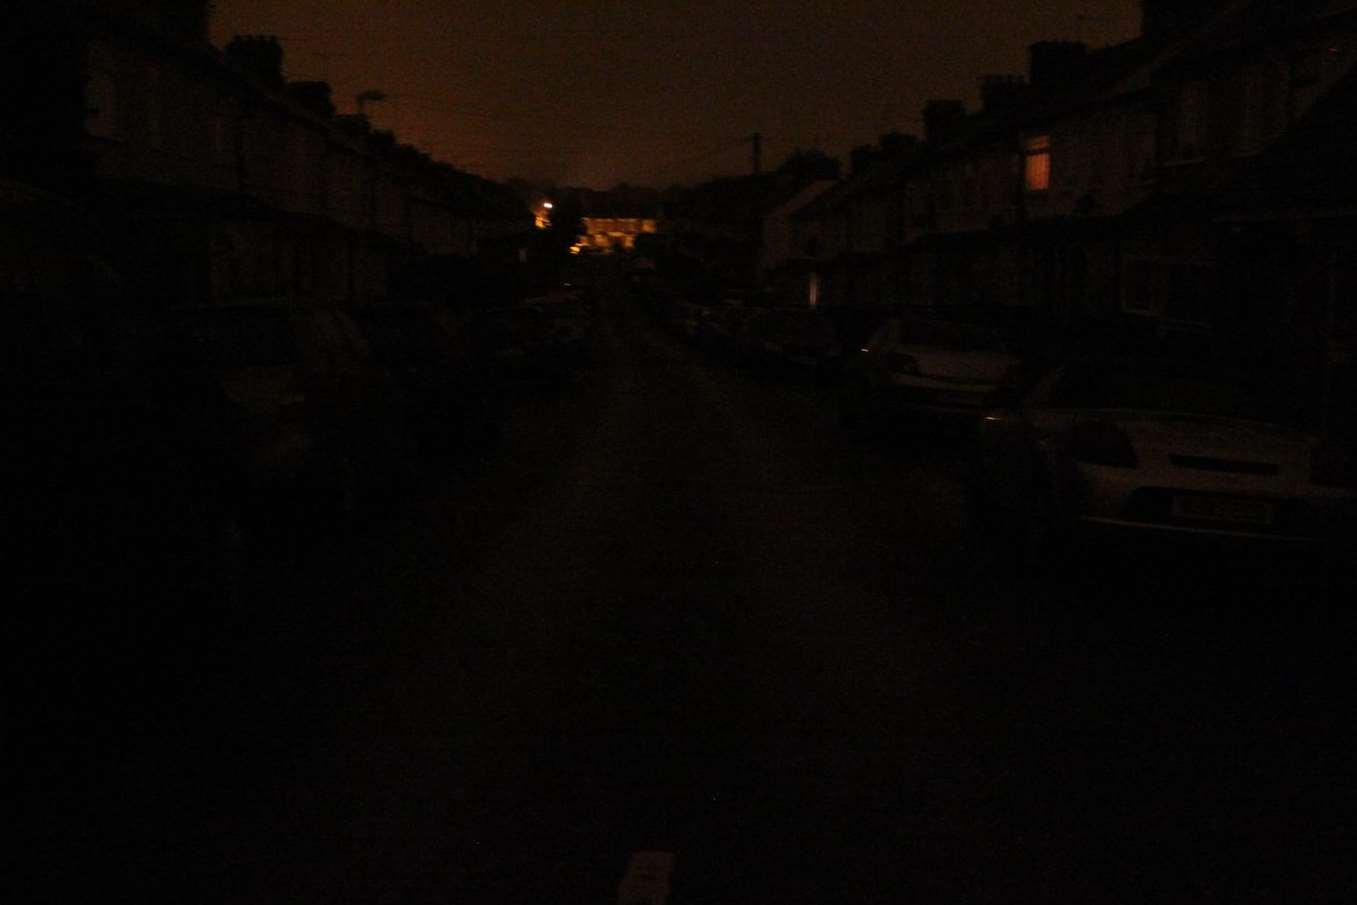 Woodfield Avenue with the lights off